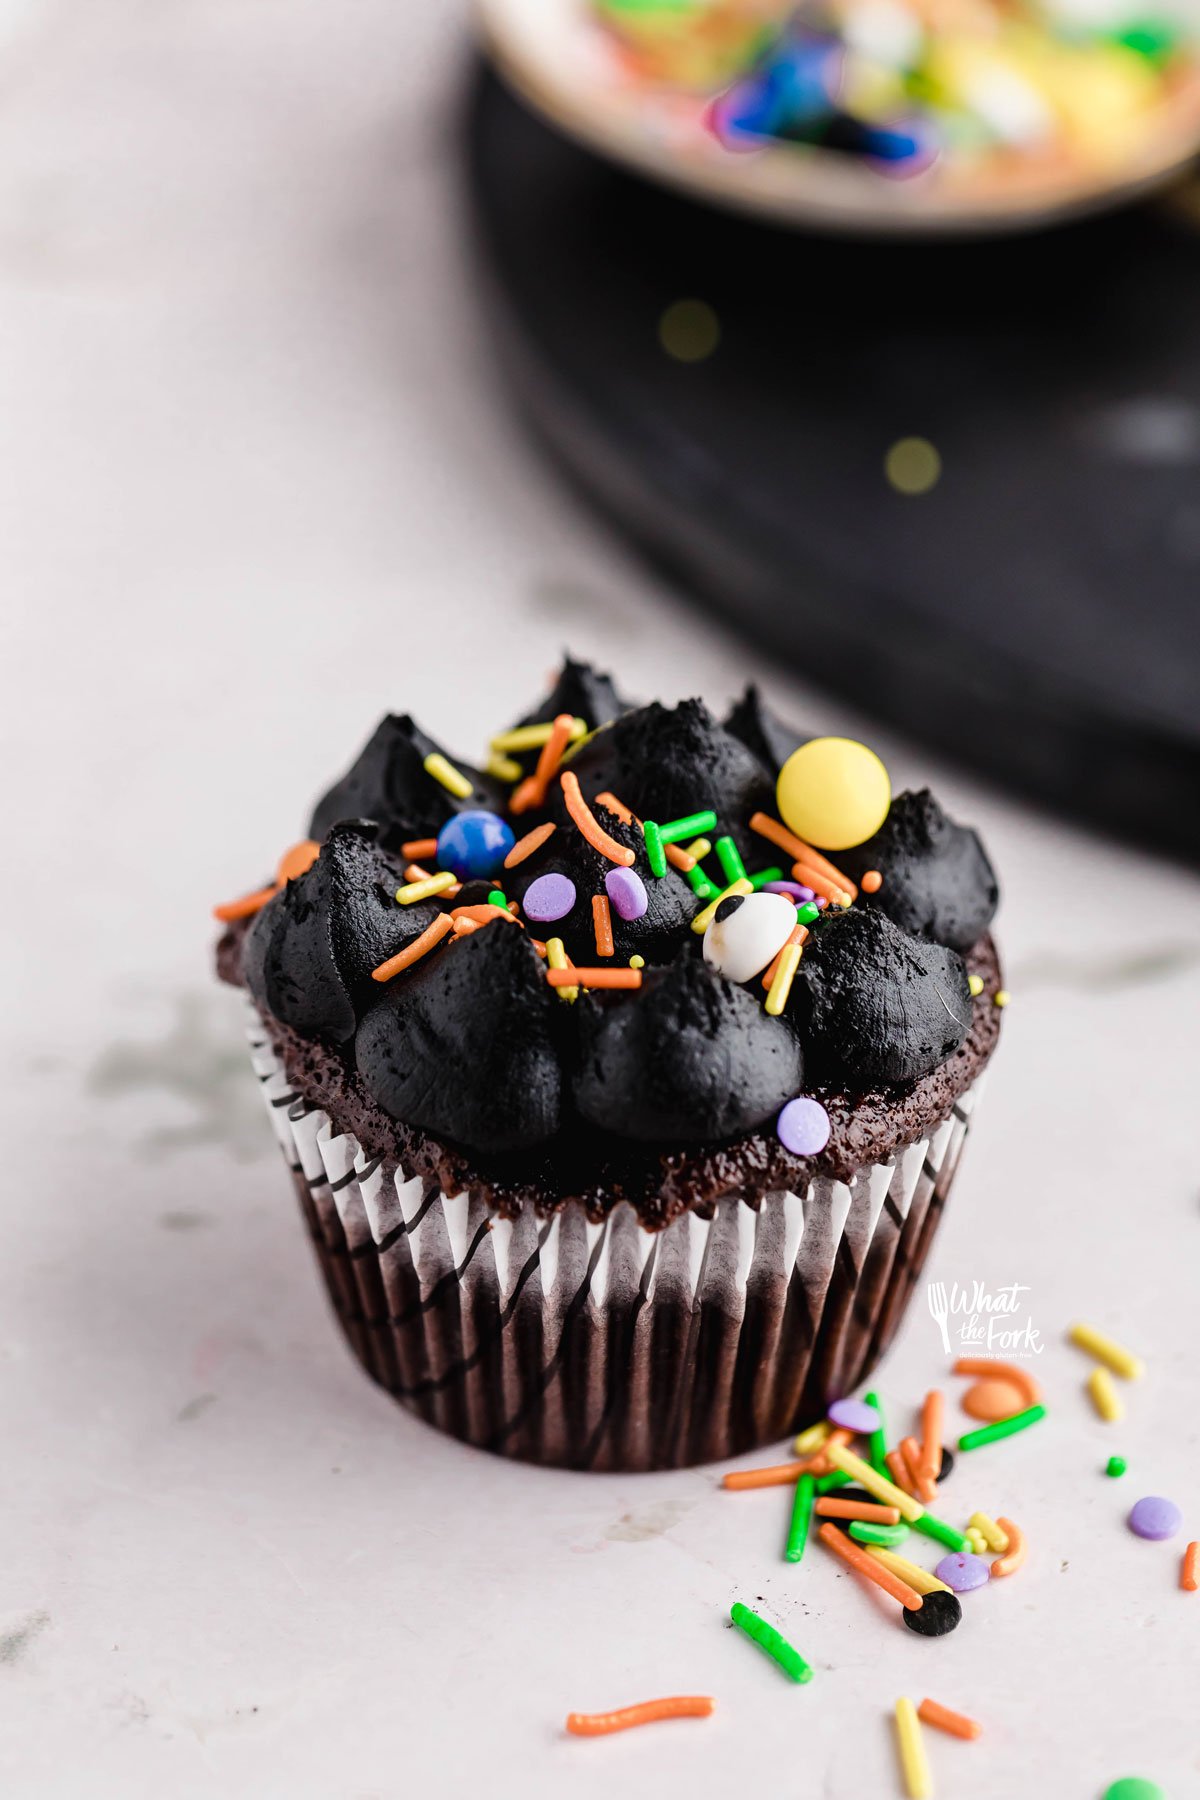 Black Frosting Recipe (American Buttercream) on a chocolate cupcake in a white paper liner decorated with Halloween sprinkles